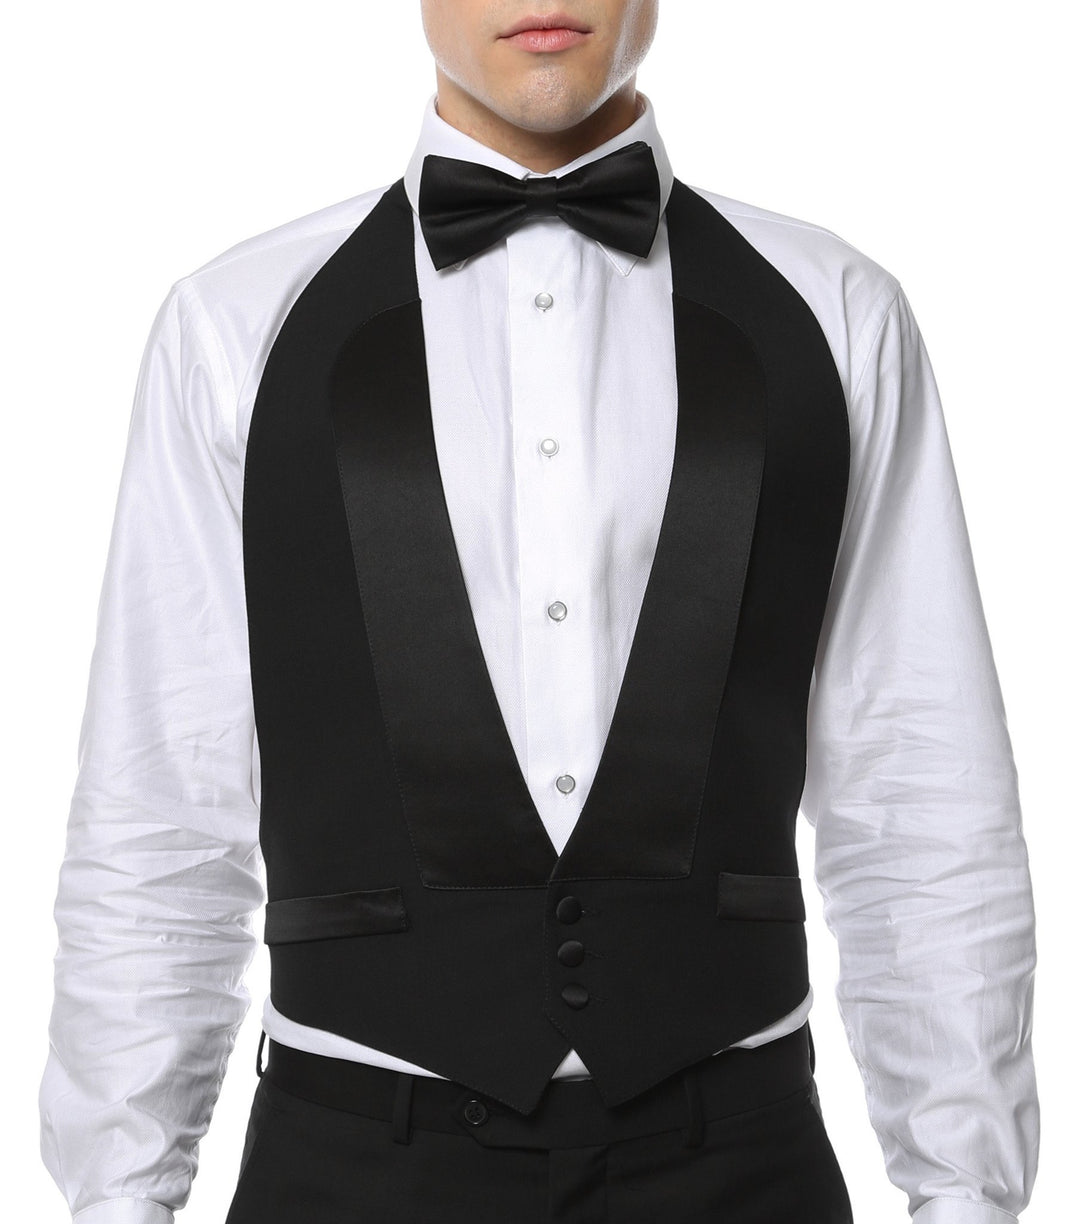 Premium Black 100% Wool Backless Tuxedo Vest / 2XL FIT ALL (50-60) W WOOL BOW TIE - New York Man Suits